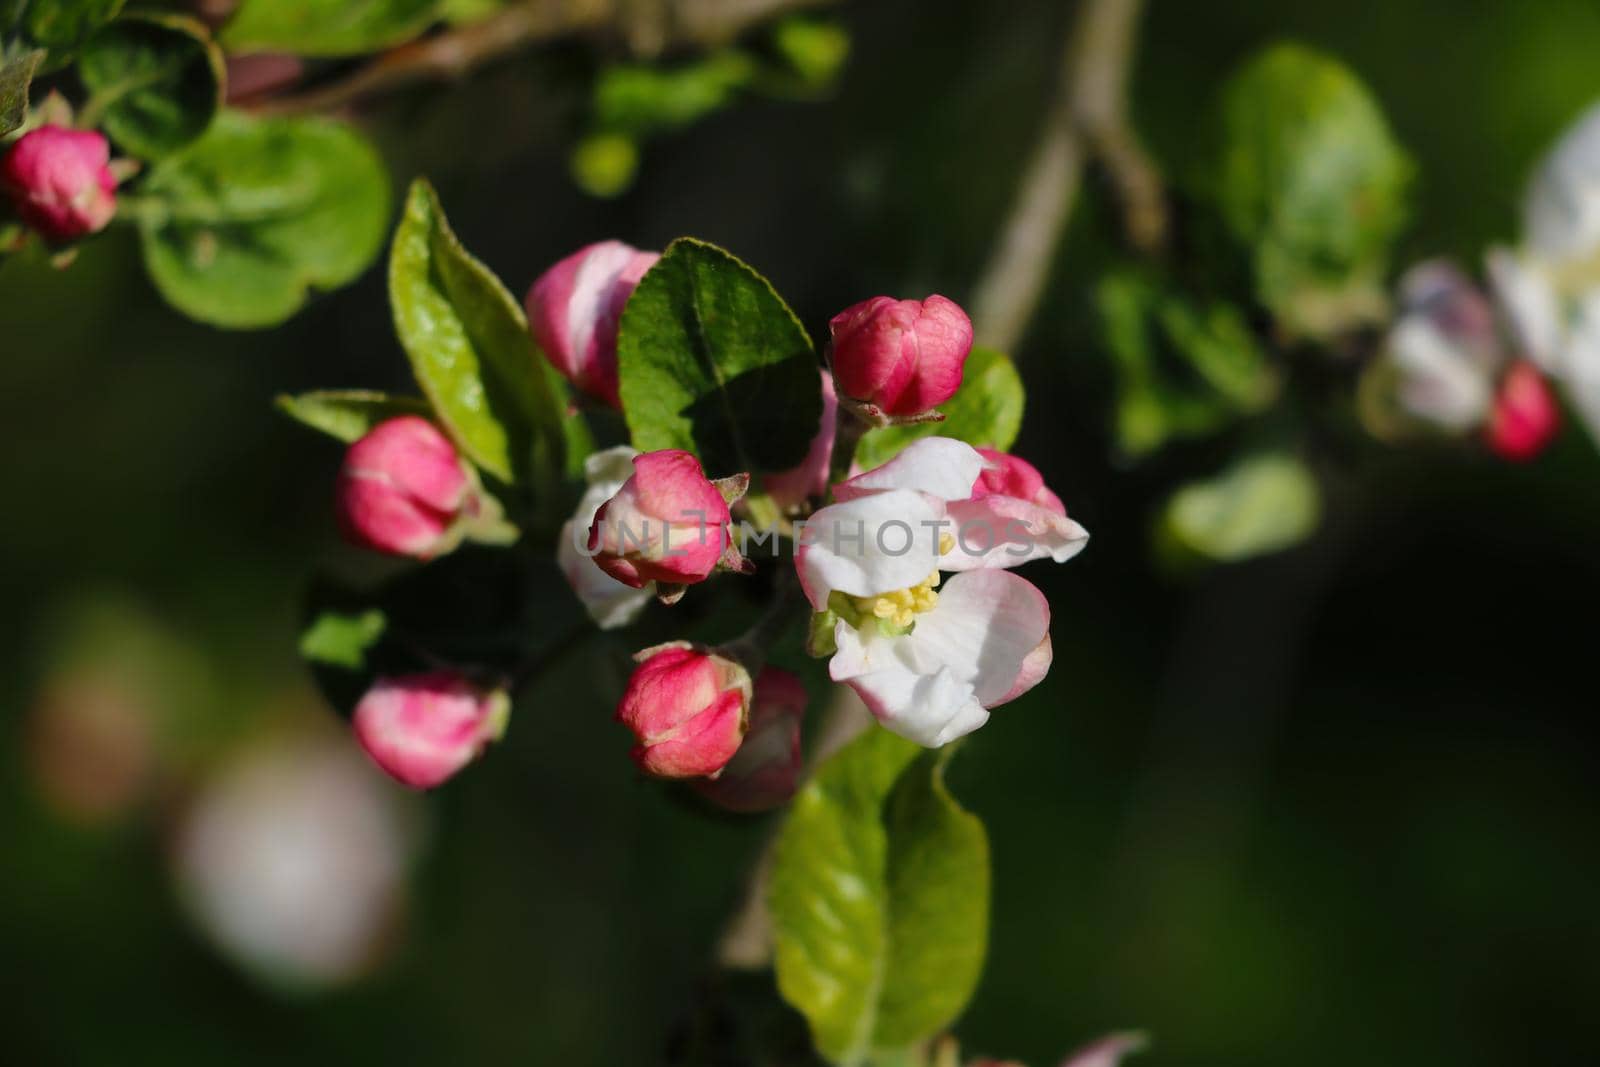 Blooming branch of apple tree in spring in the garden